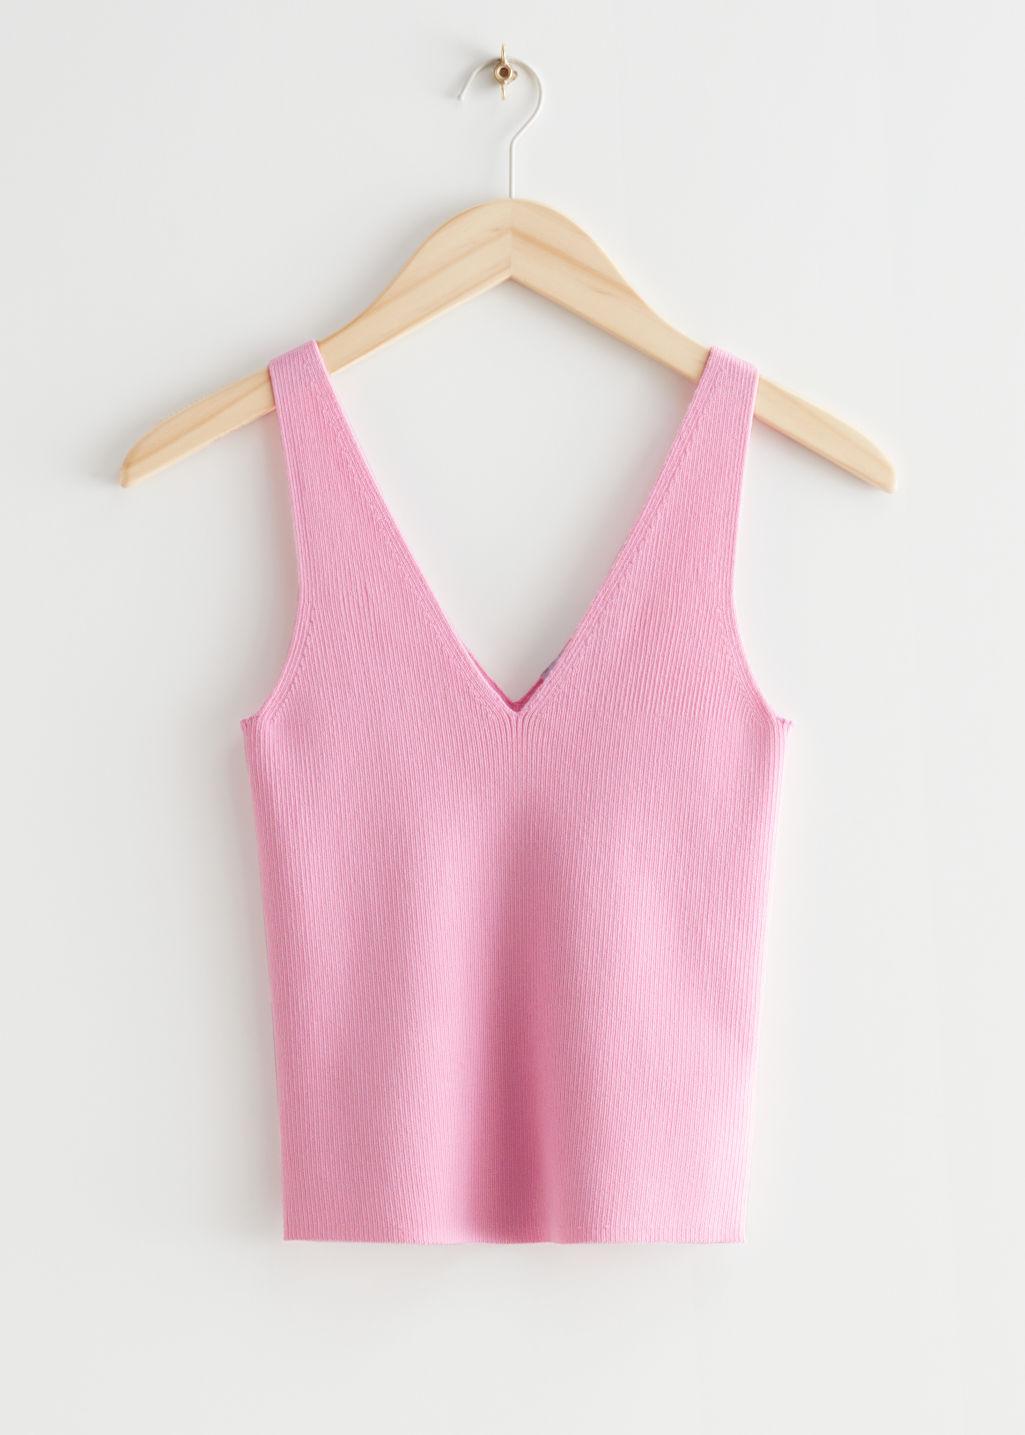 & Other Stories Rib Knit Tank Top in Pink | Lyst